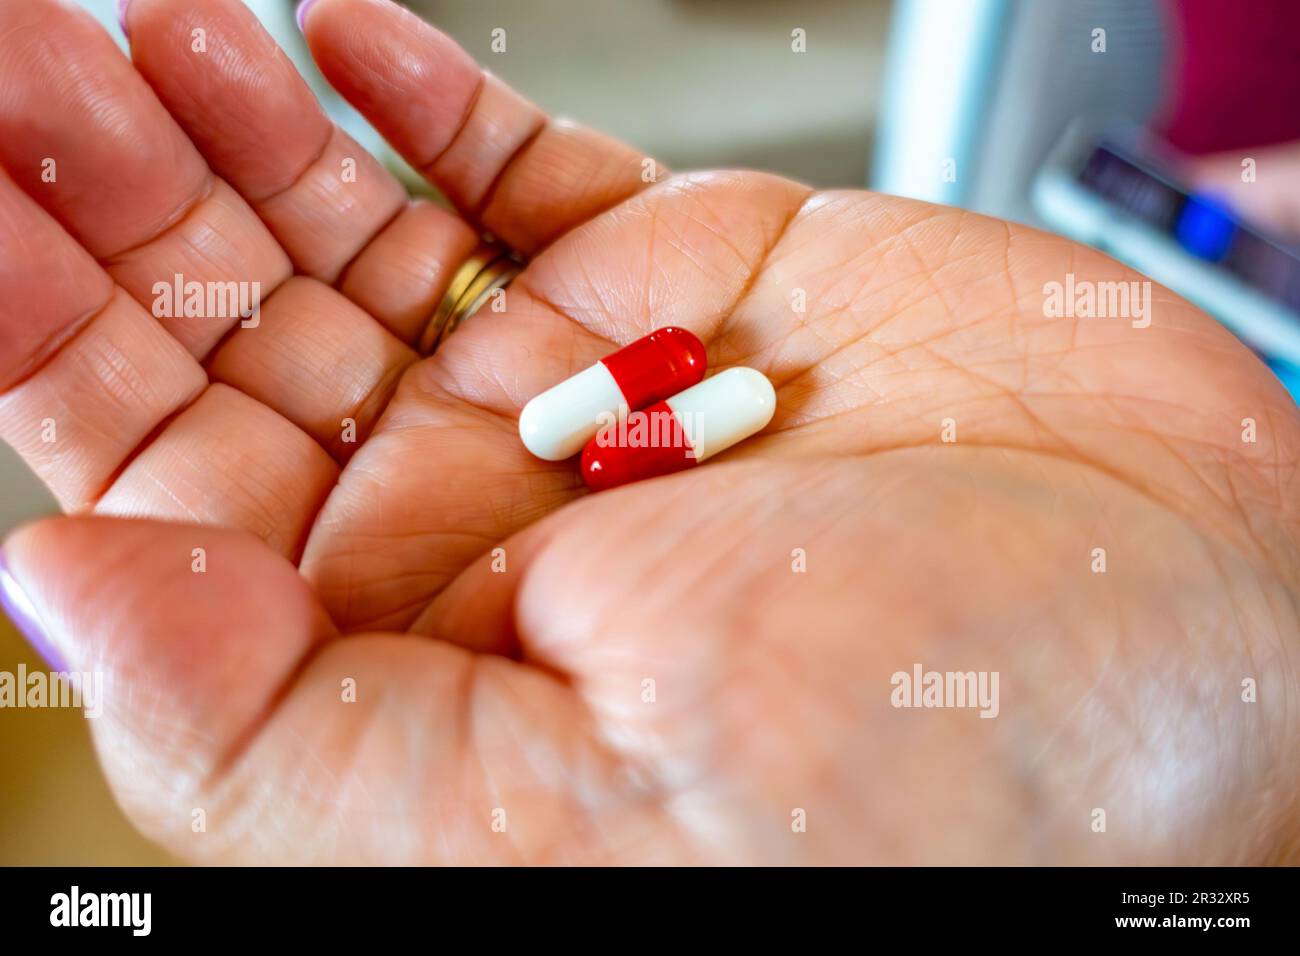 A female hand holding red and white paracetamol capsules. An off the shelf pain killer. Stock Photo